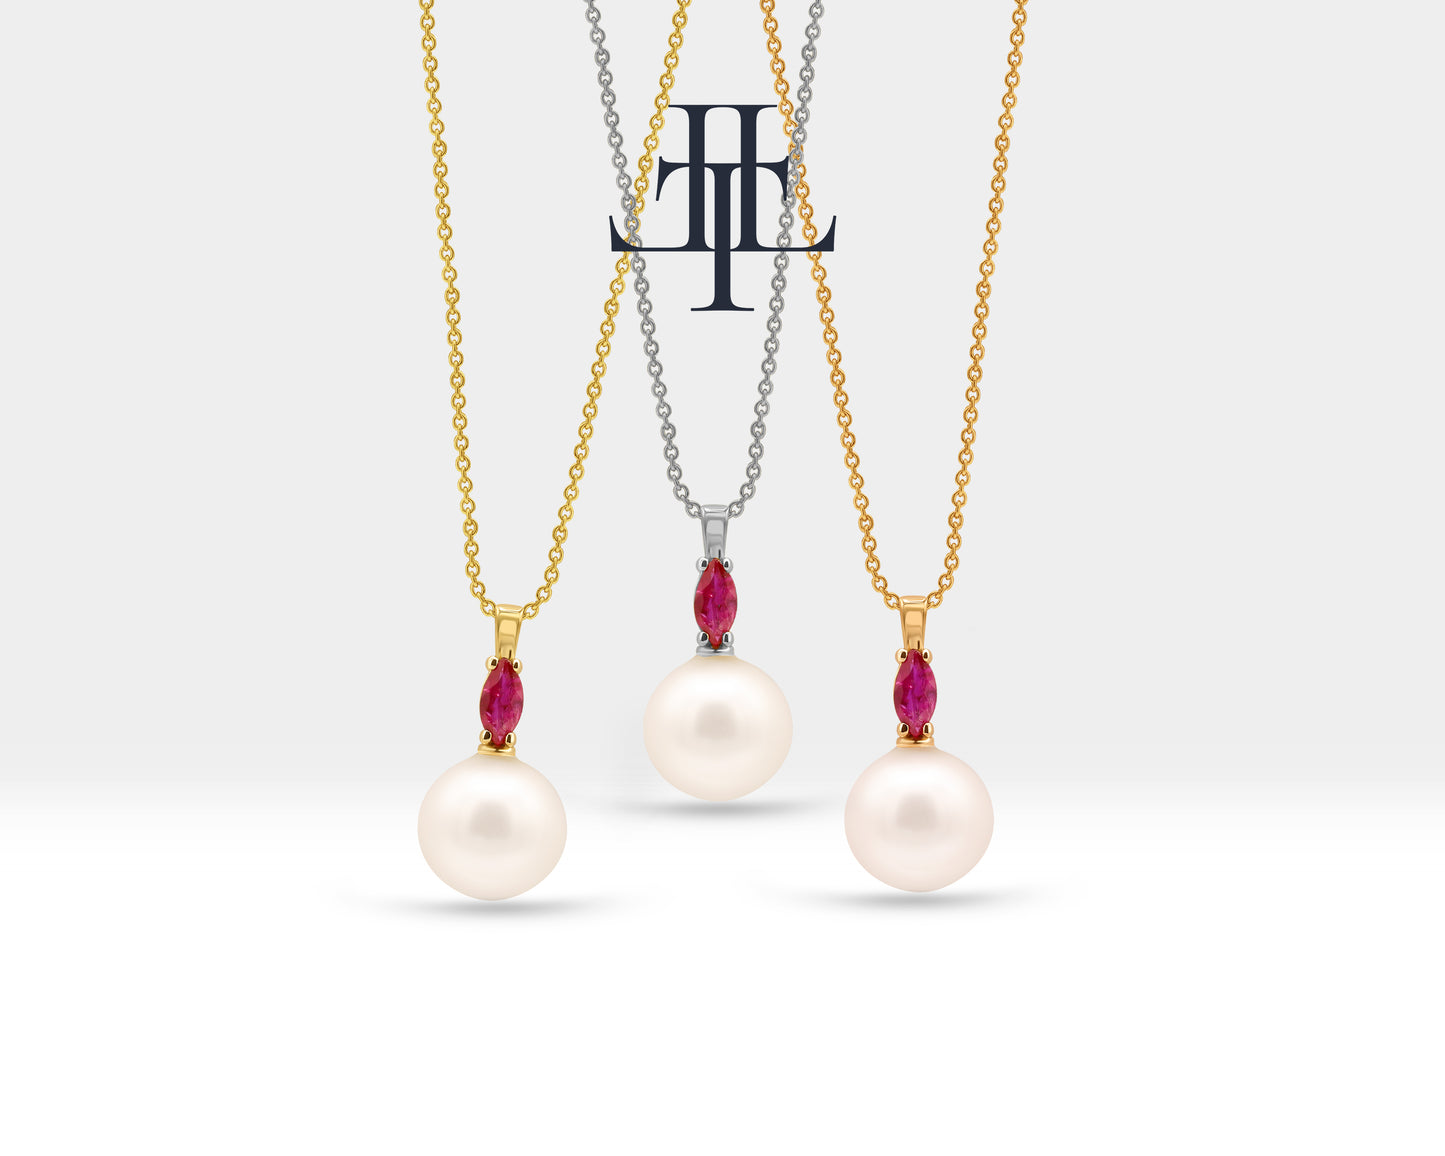 Bridal Jewelry Set Necklace and Earrings Set in 14K Solid Gold with Pearl and Marquise Cut Ruby Necklace Earring Set